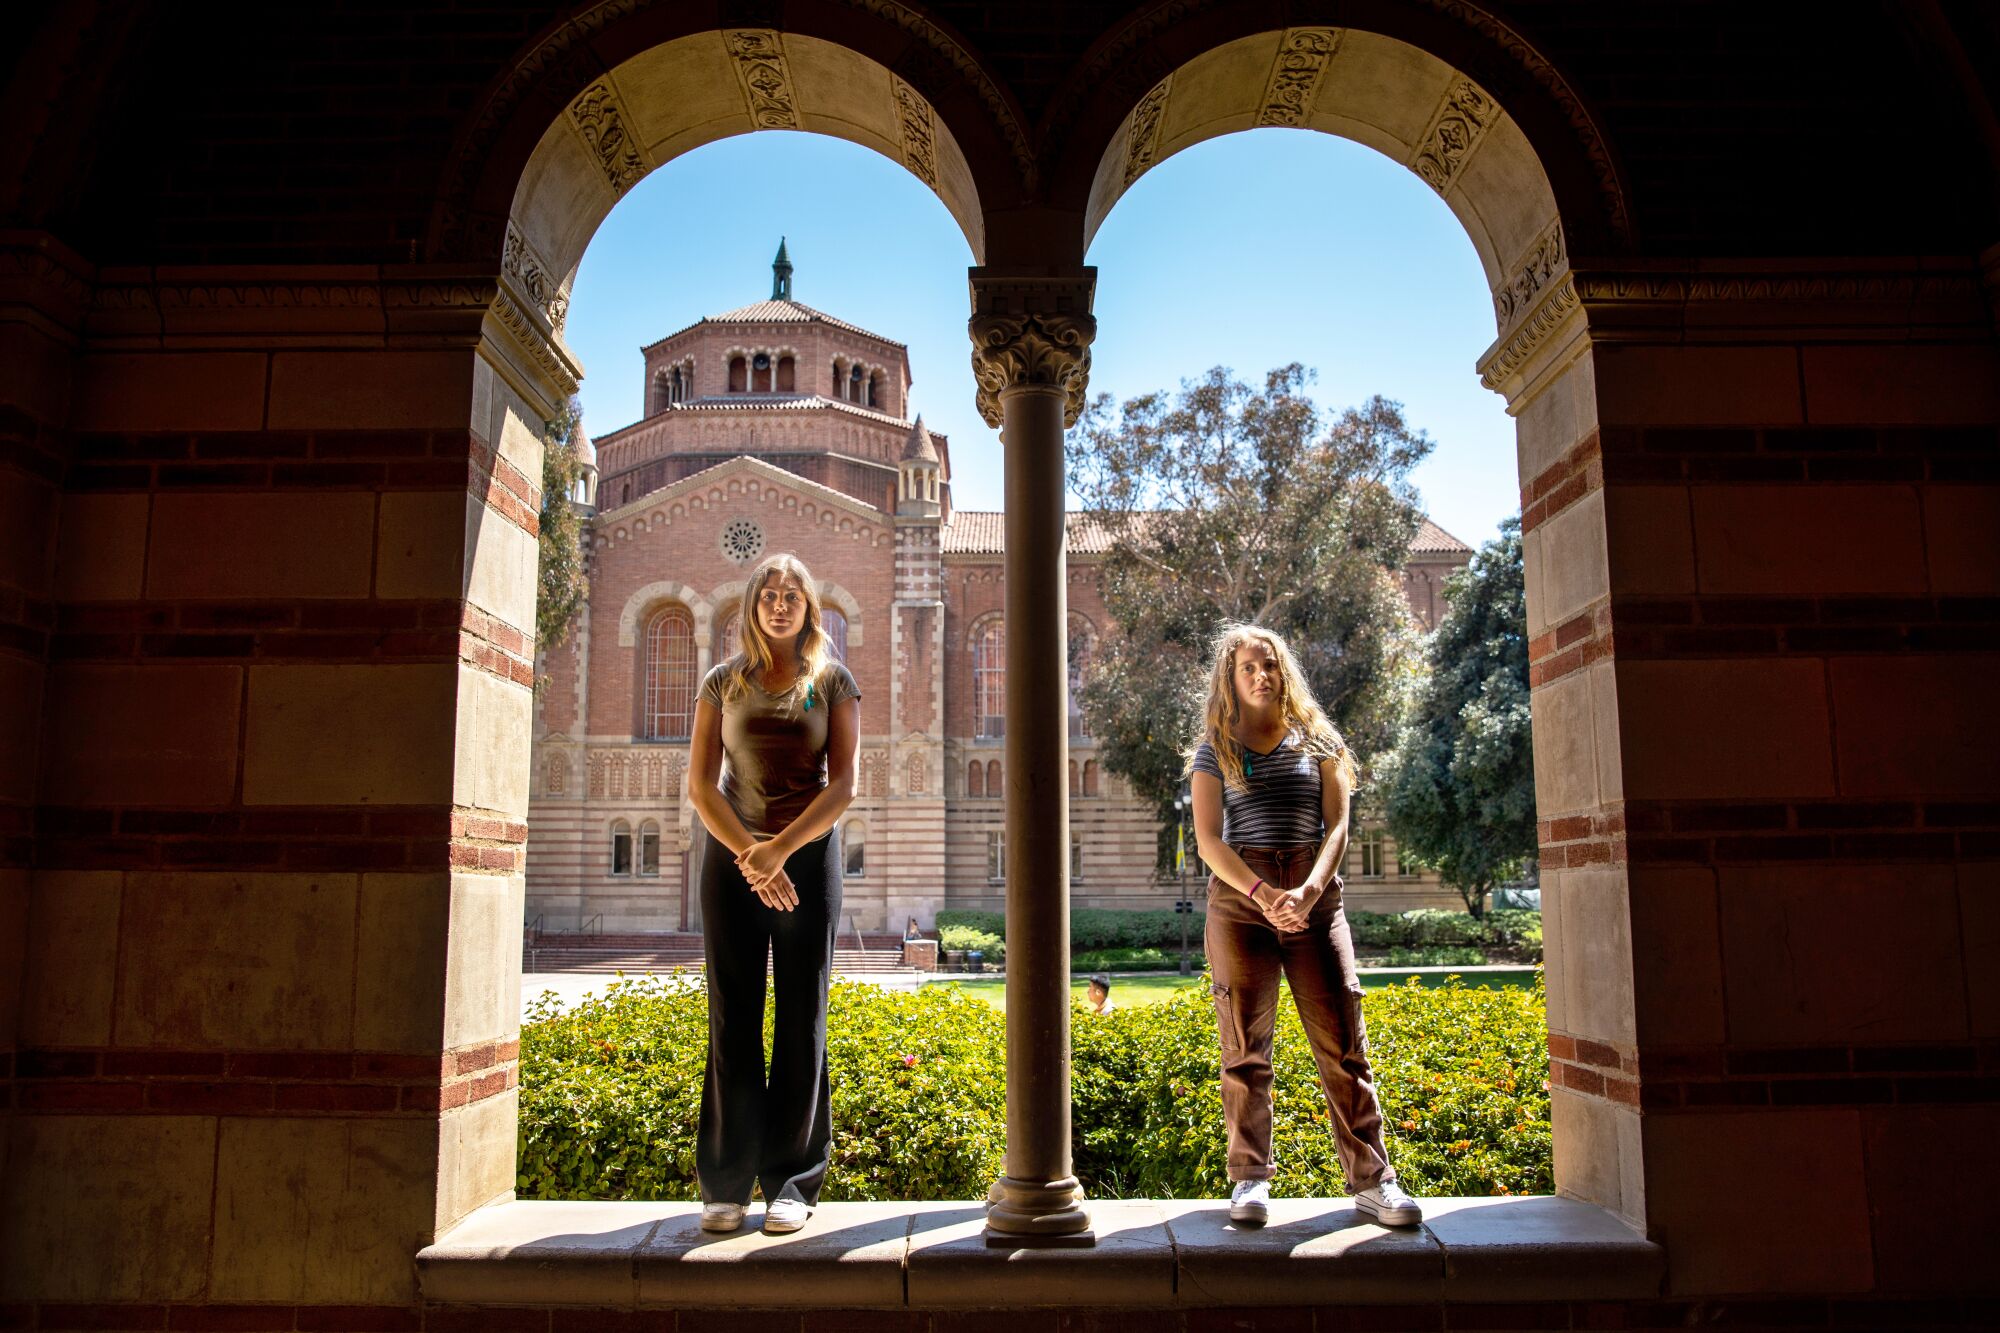 Two young women stand on a ledge of an archway at a university campus, looking firmly at the camera.